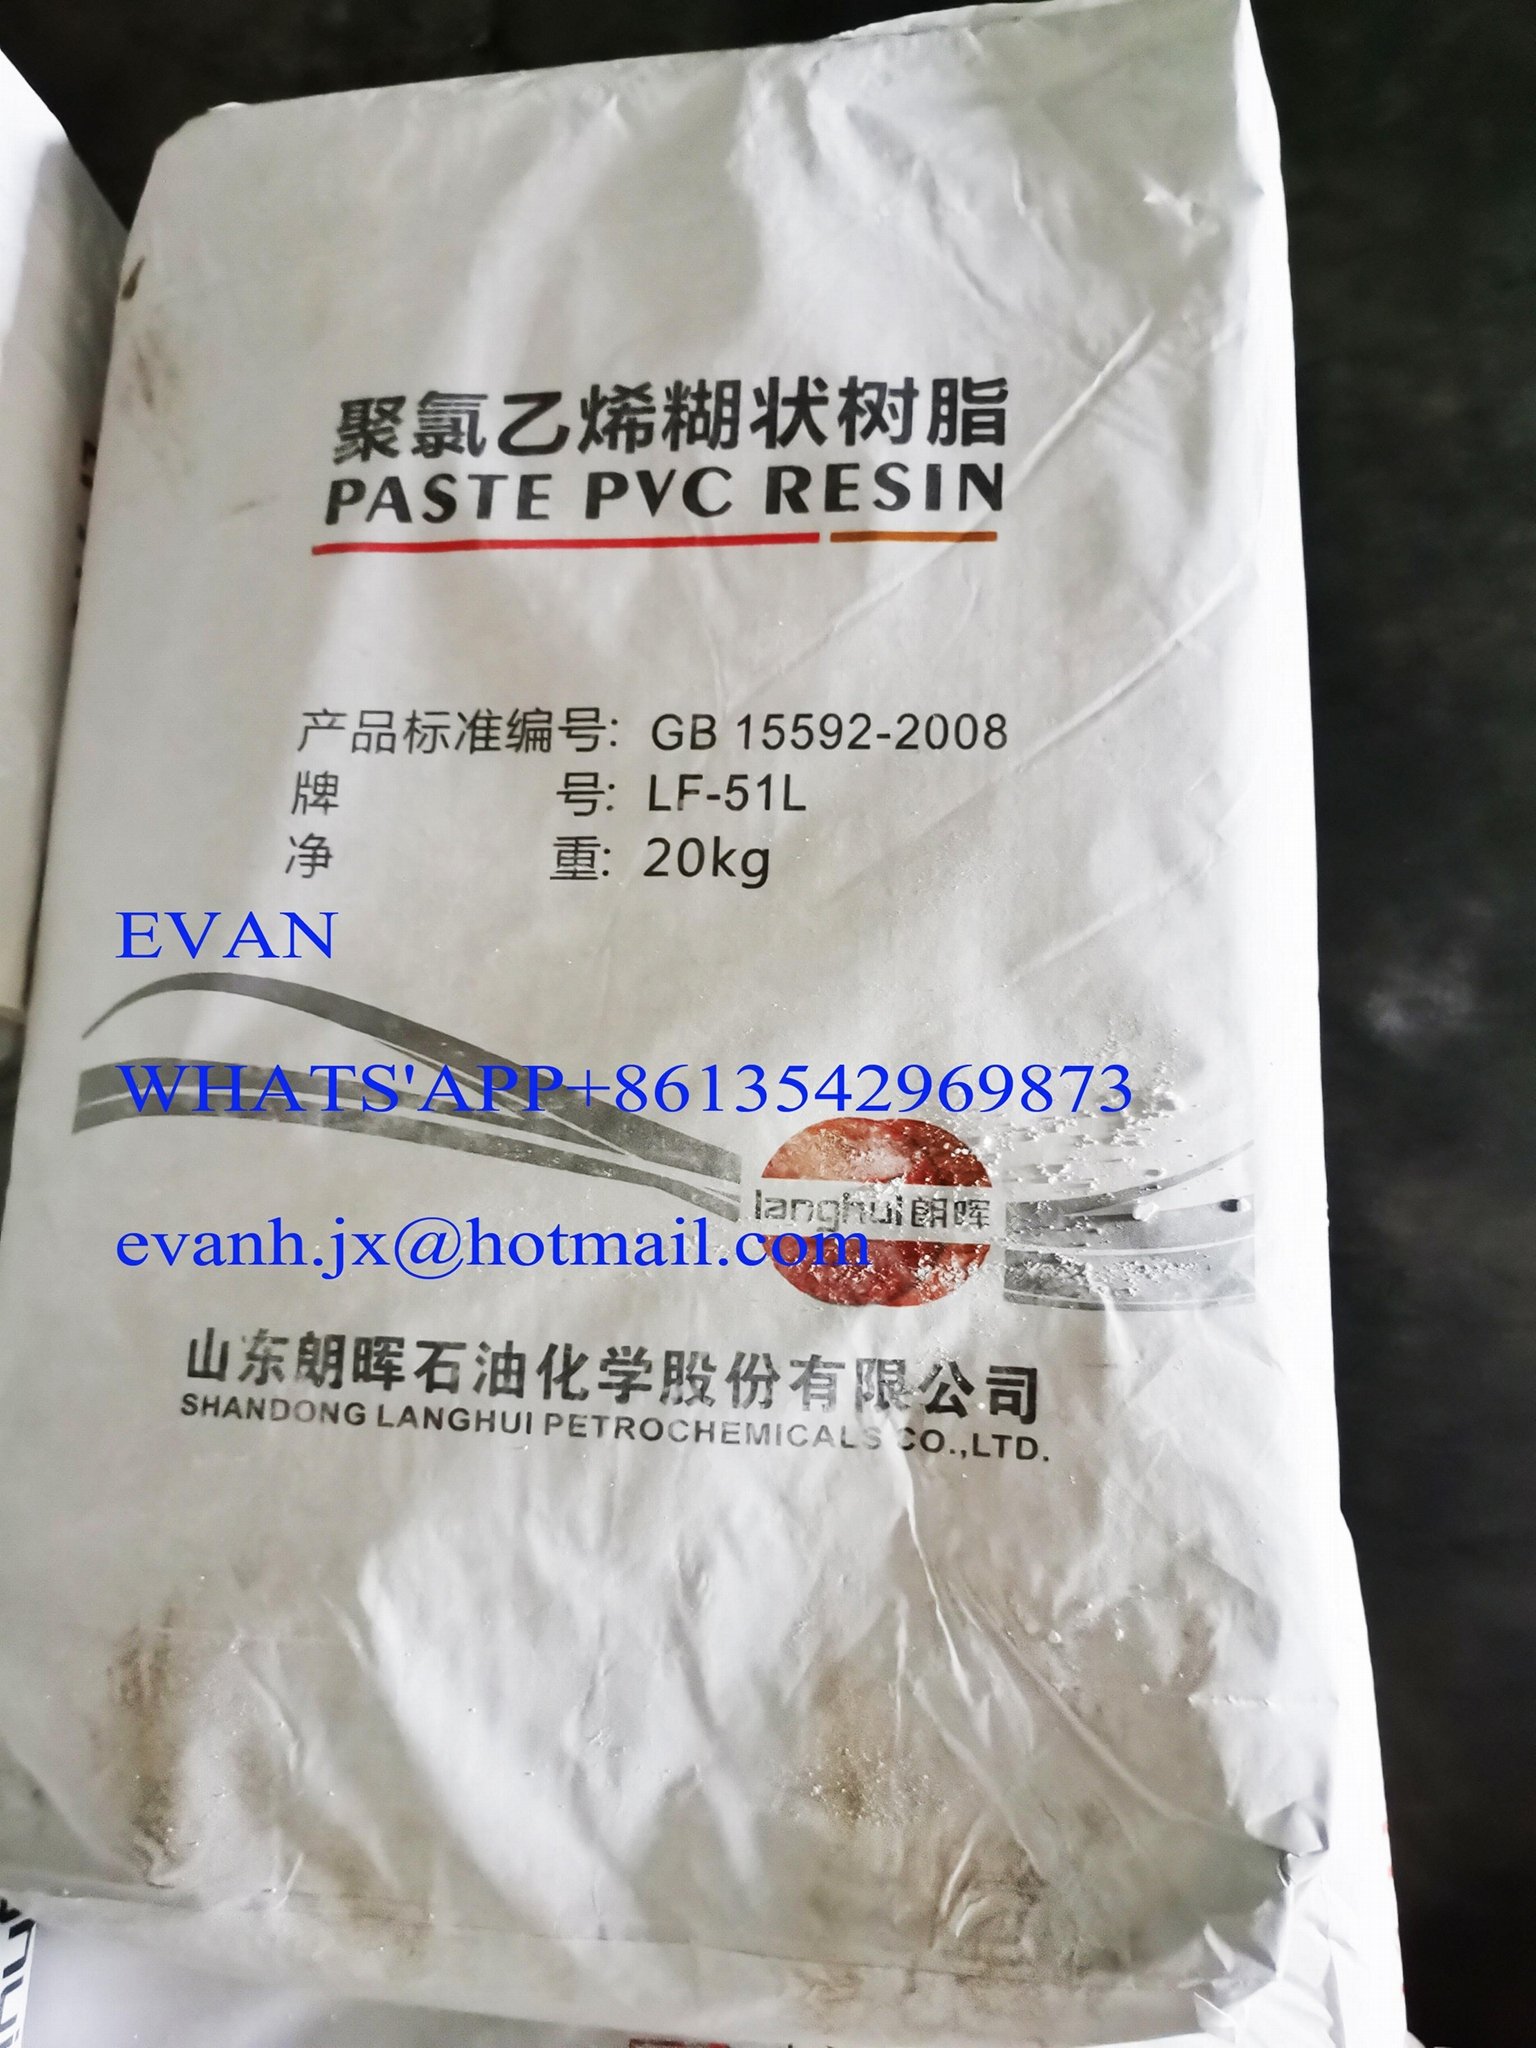 Micro PVC paste resin LF-51L for injection toy,micro-products